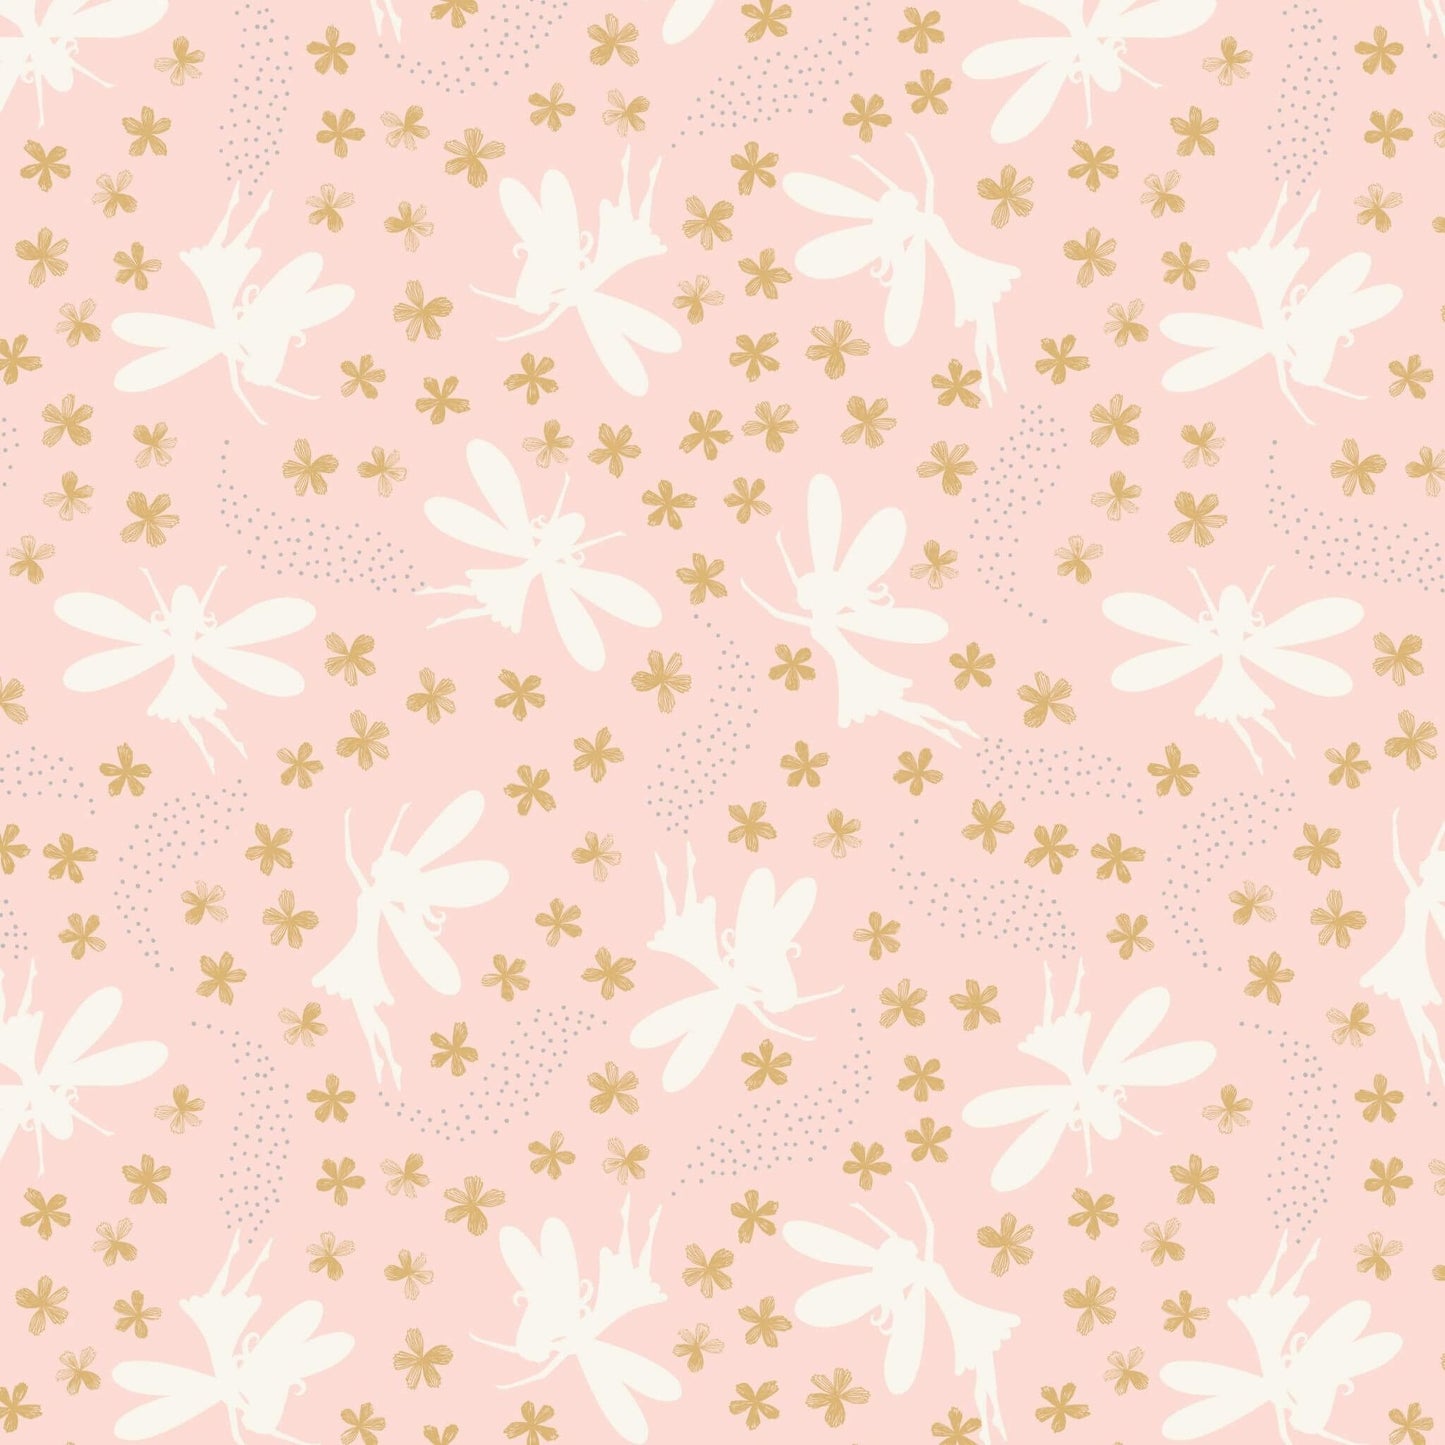 Floral Fairies - Fairy Clocks Fabric Range - Lewis and Irene - Light Pink with Silver Metallic